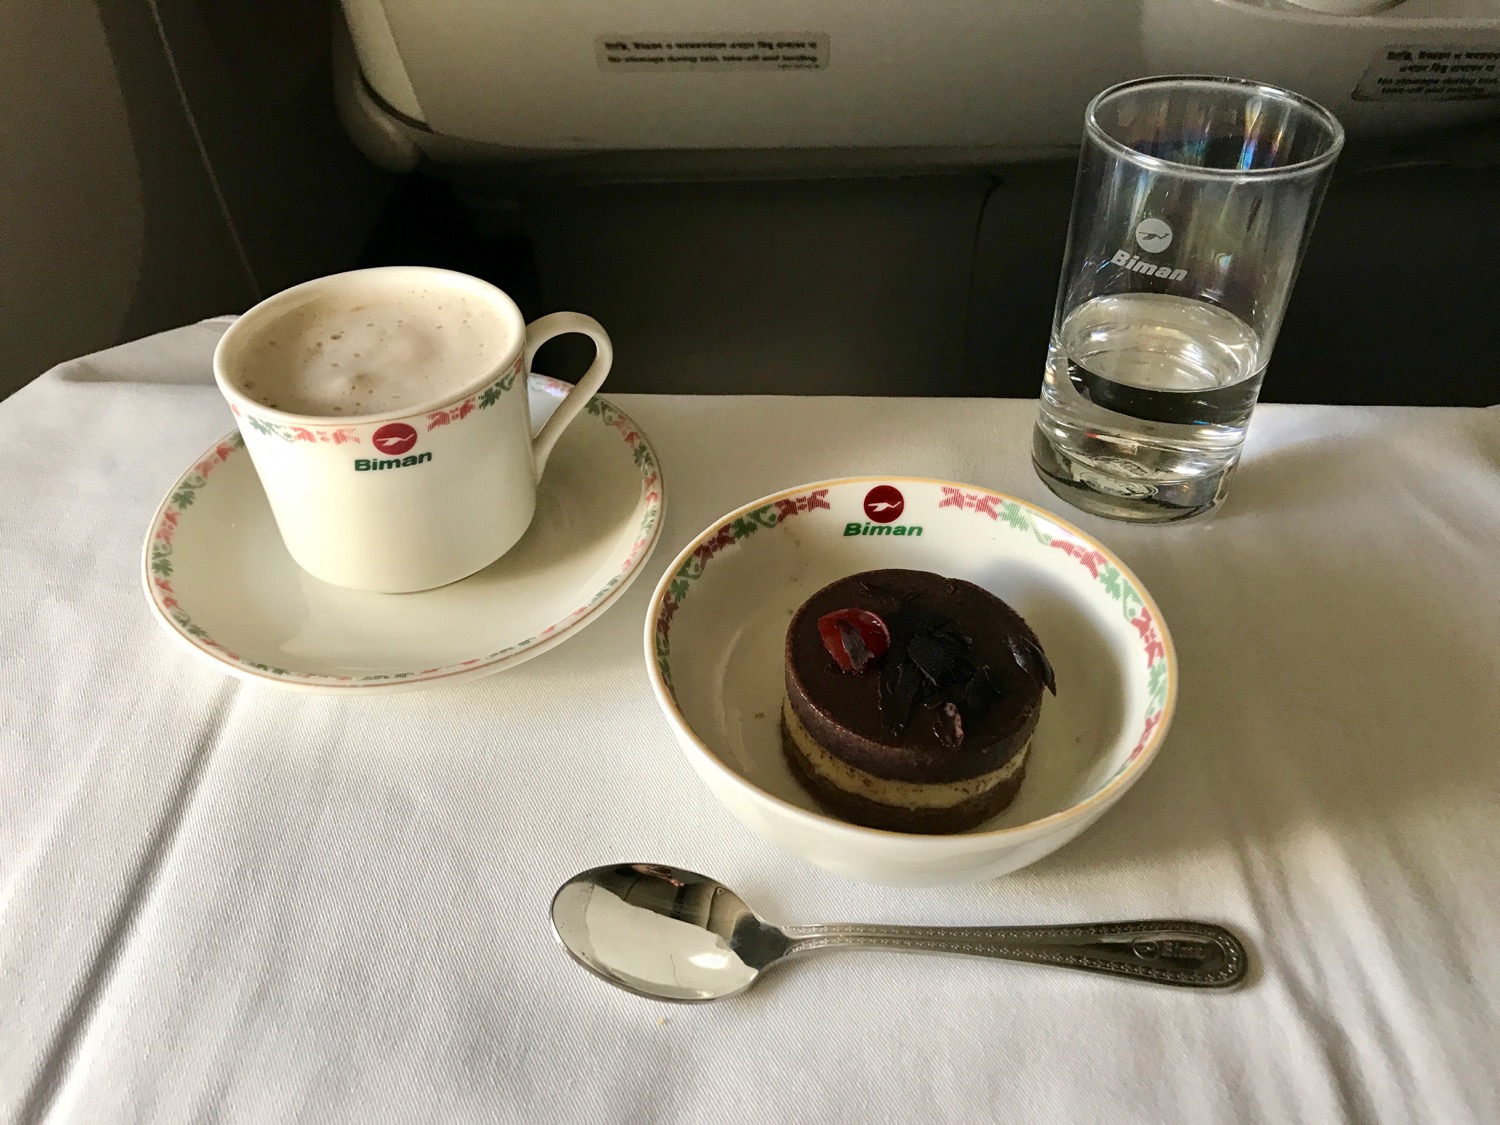 a plate with a cup and saucer with a dessert on it